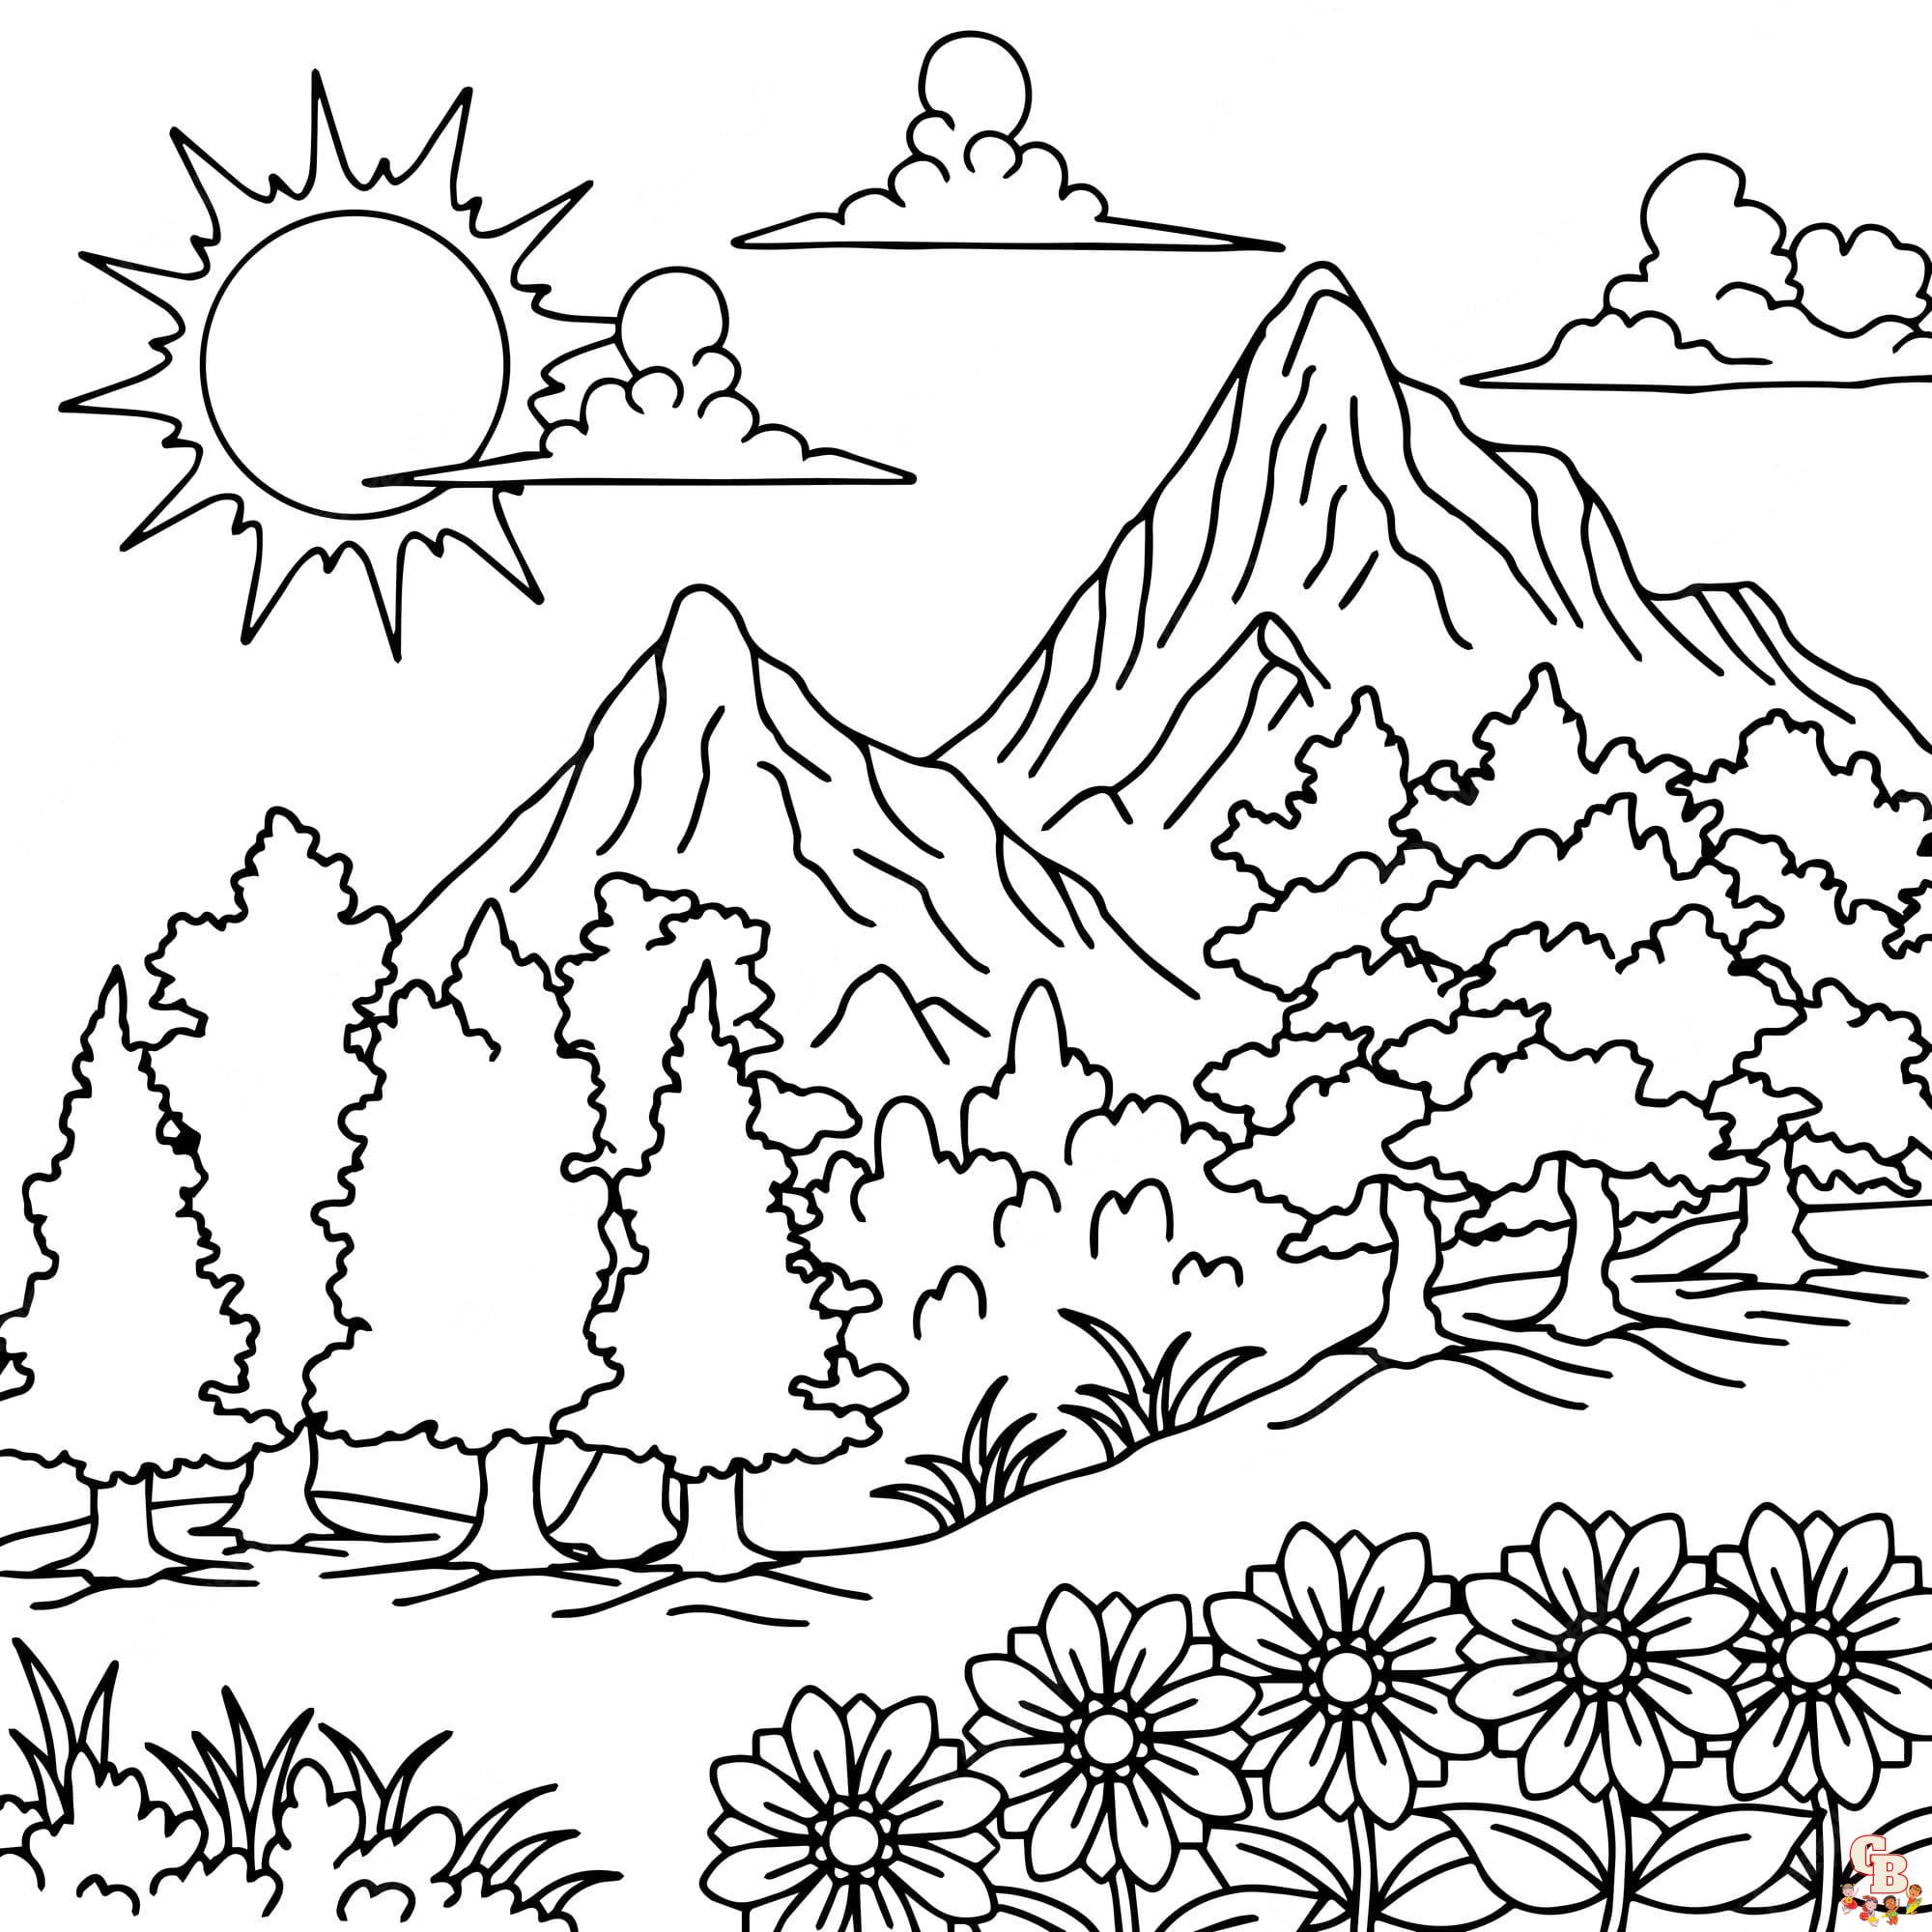 Printable scenery coloring pages free for kids and adults